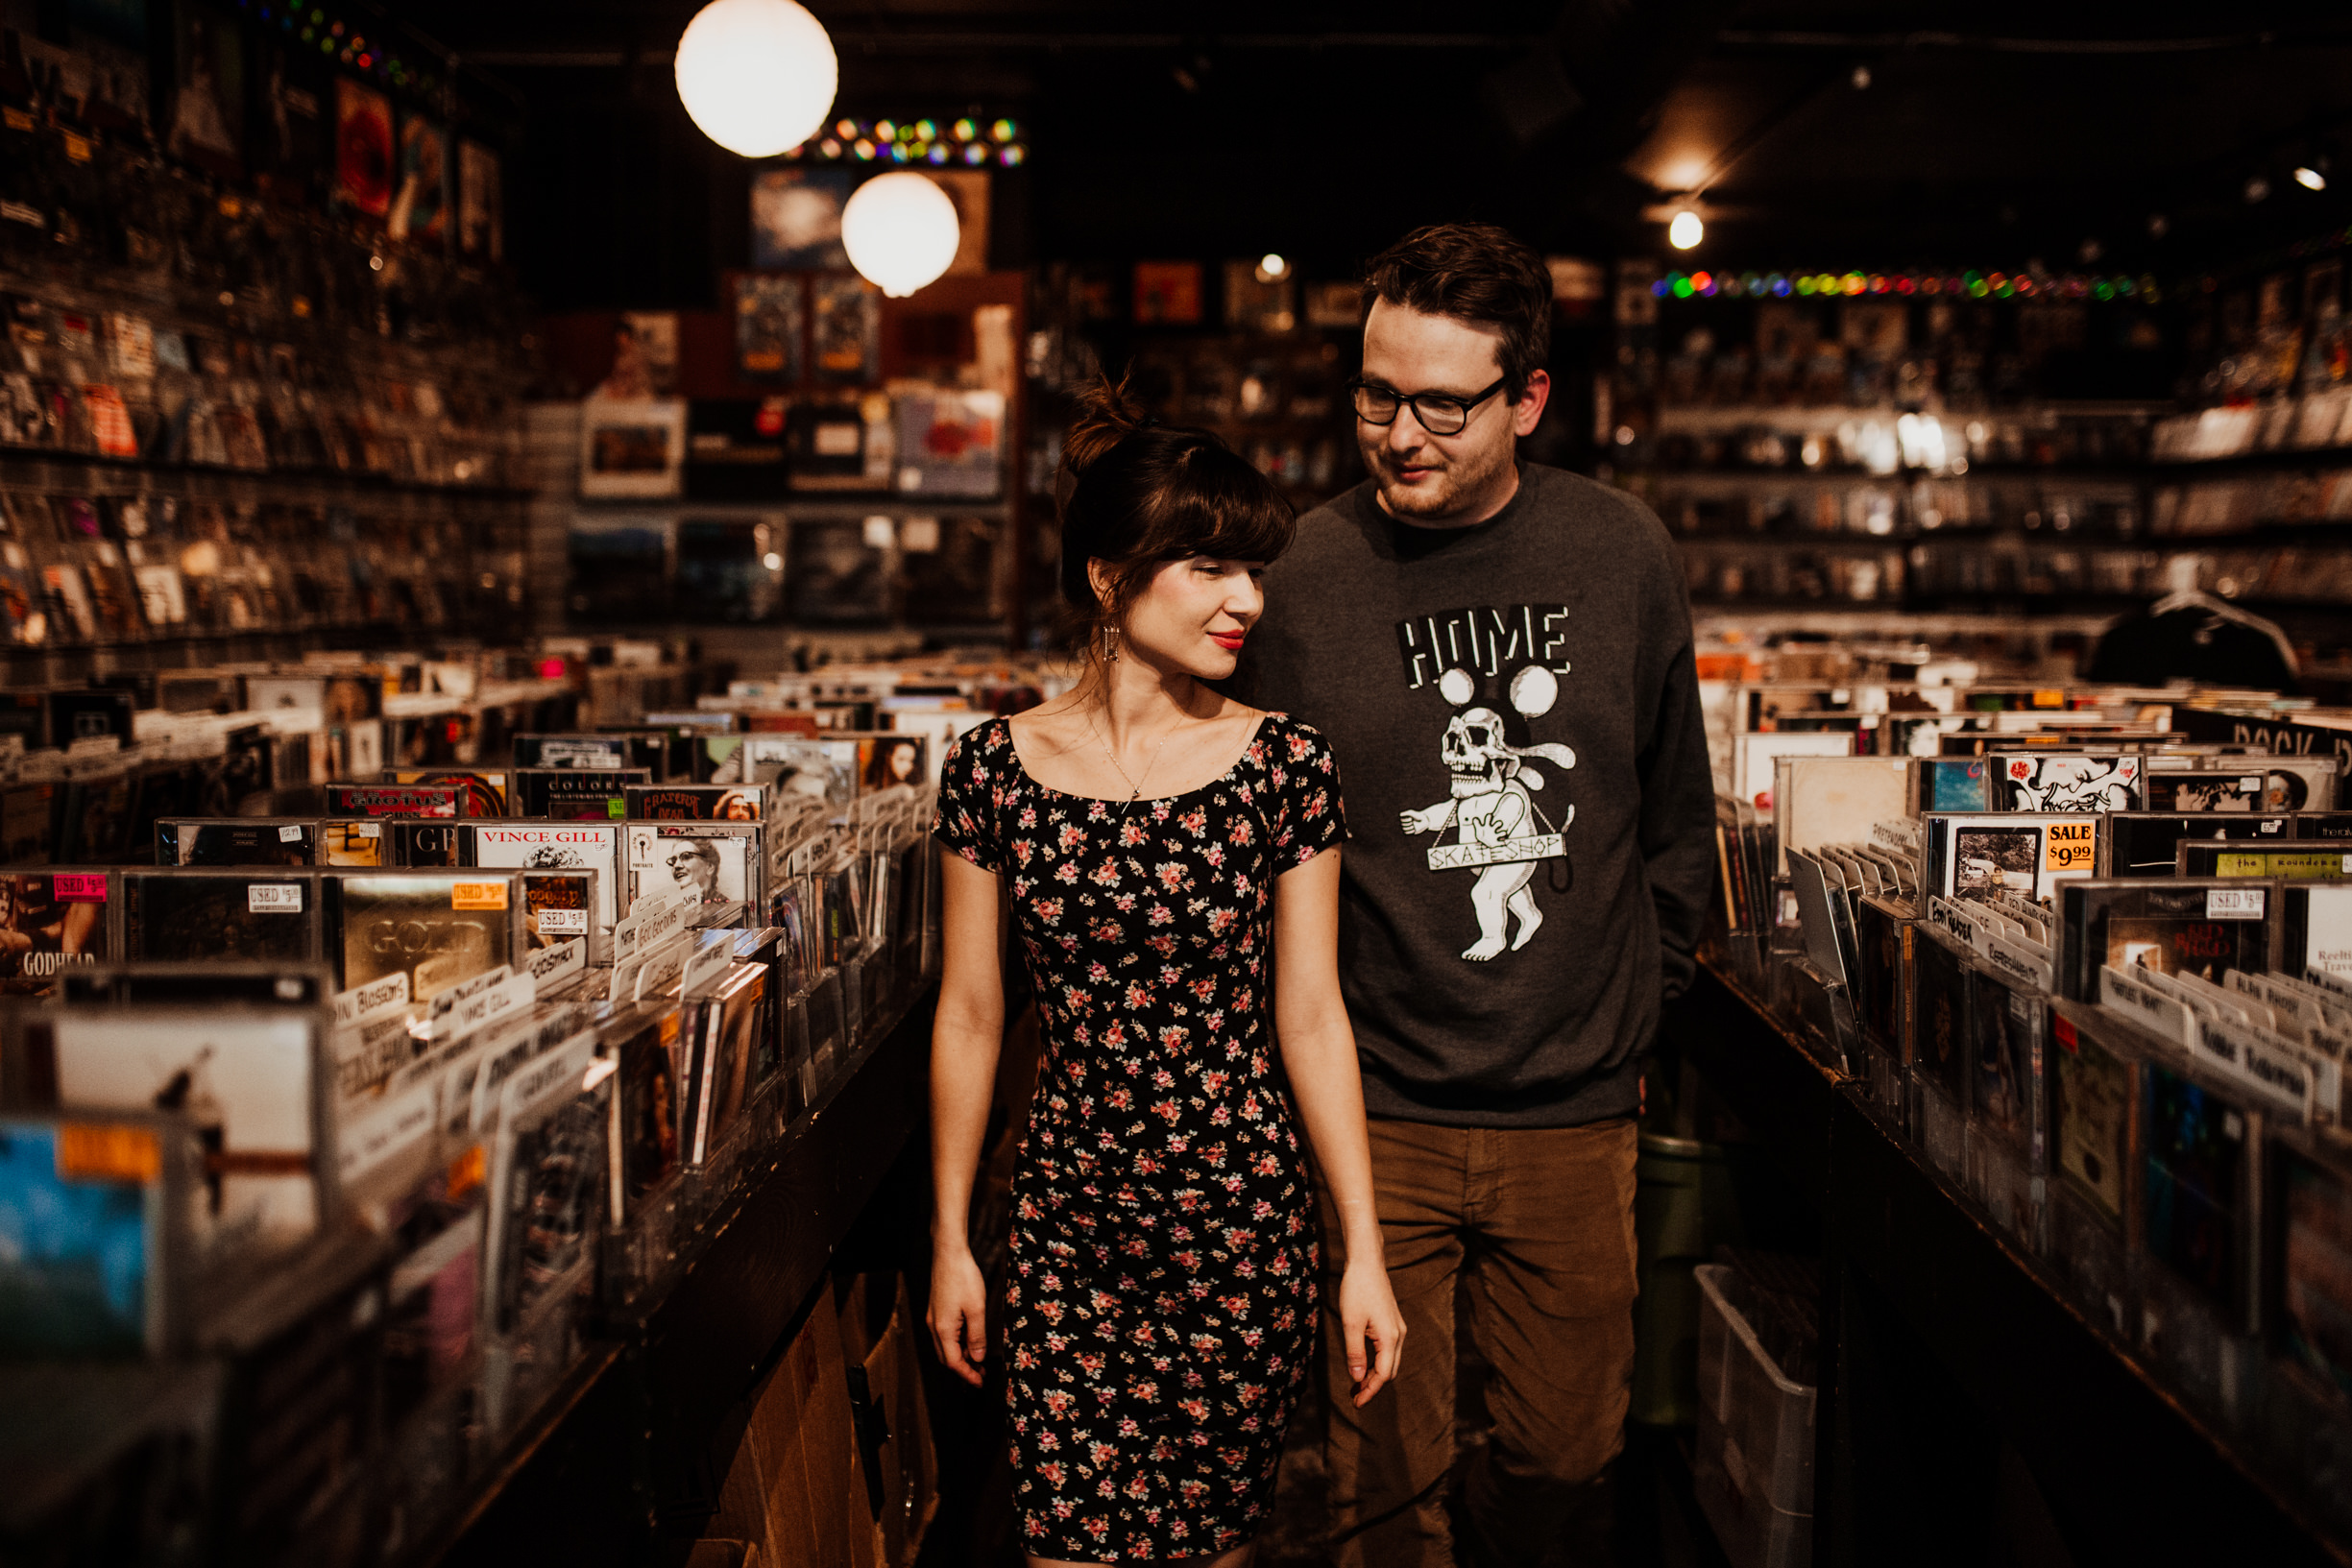 louisville-engagement-photographer-record-store-in-home-session-crystal-ludwick-photo (1 of 53).jpg